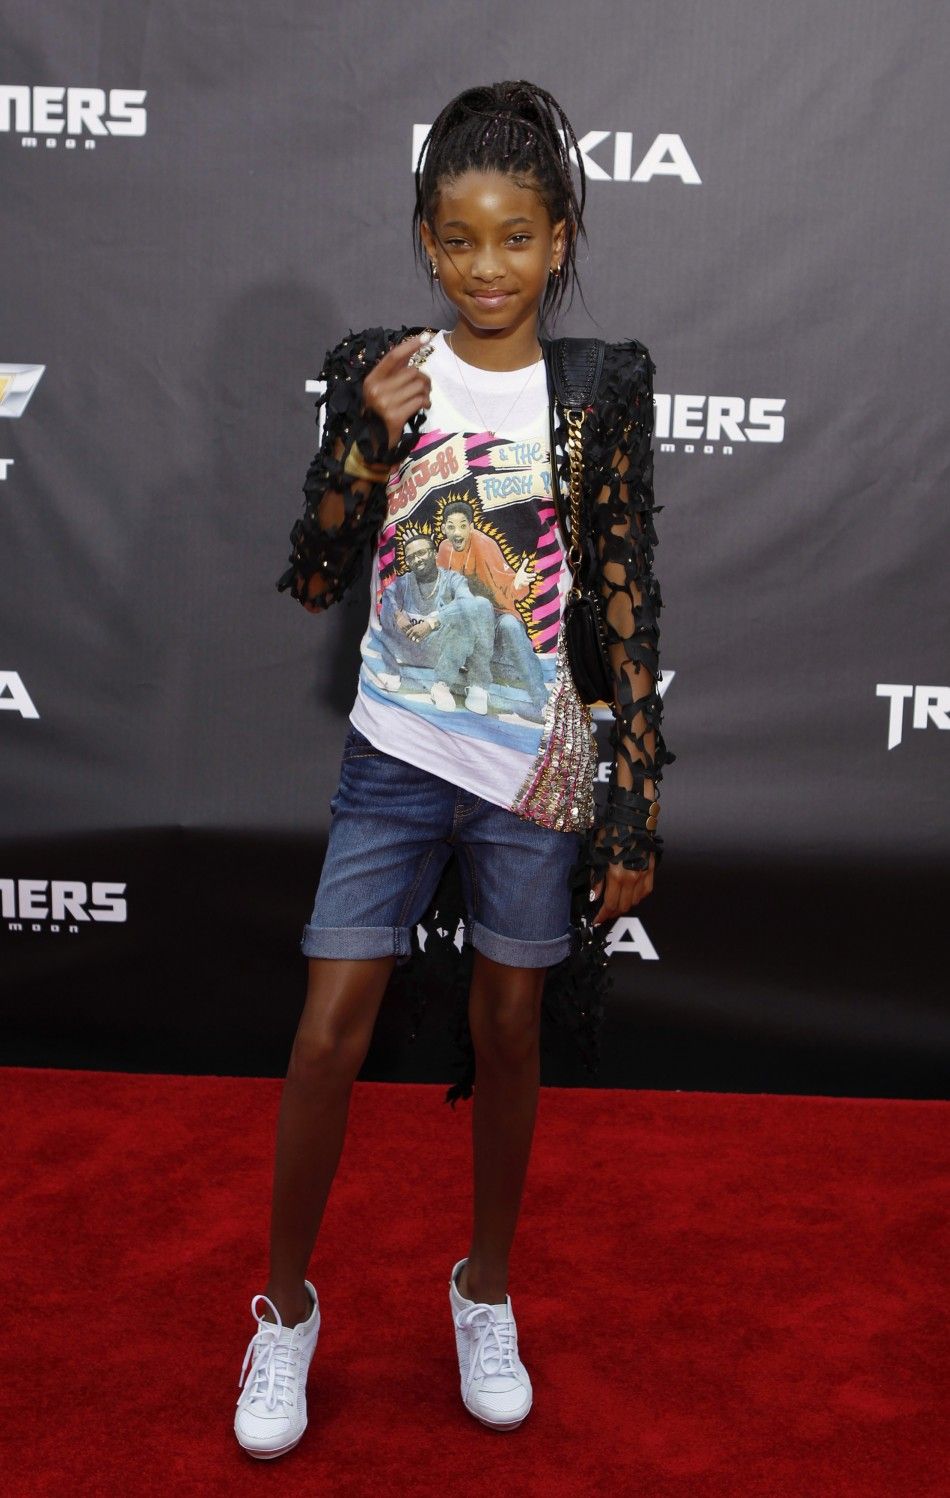 Actress Willow Smith arrives for the premiere of quotTransformers Dark of The Moonquot in Times Square in New York June 28, 2011.